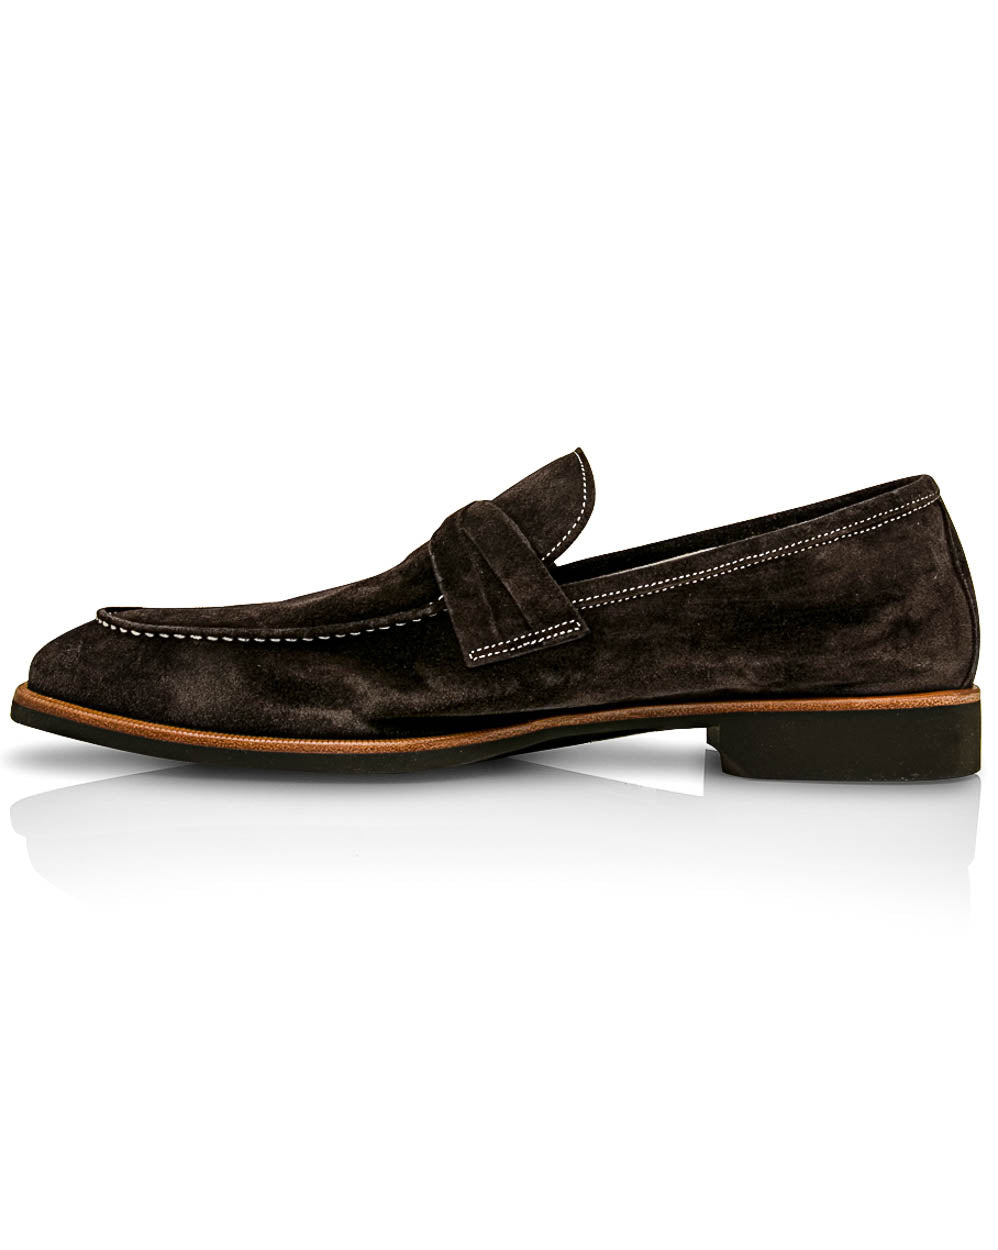 Lavagna Suede Crisscross Penny Loafer